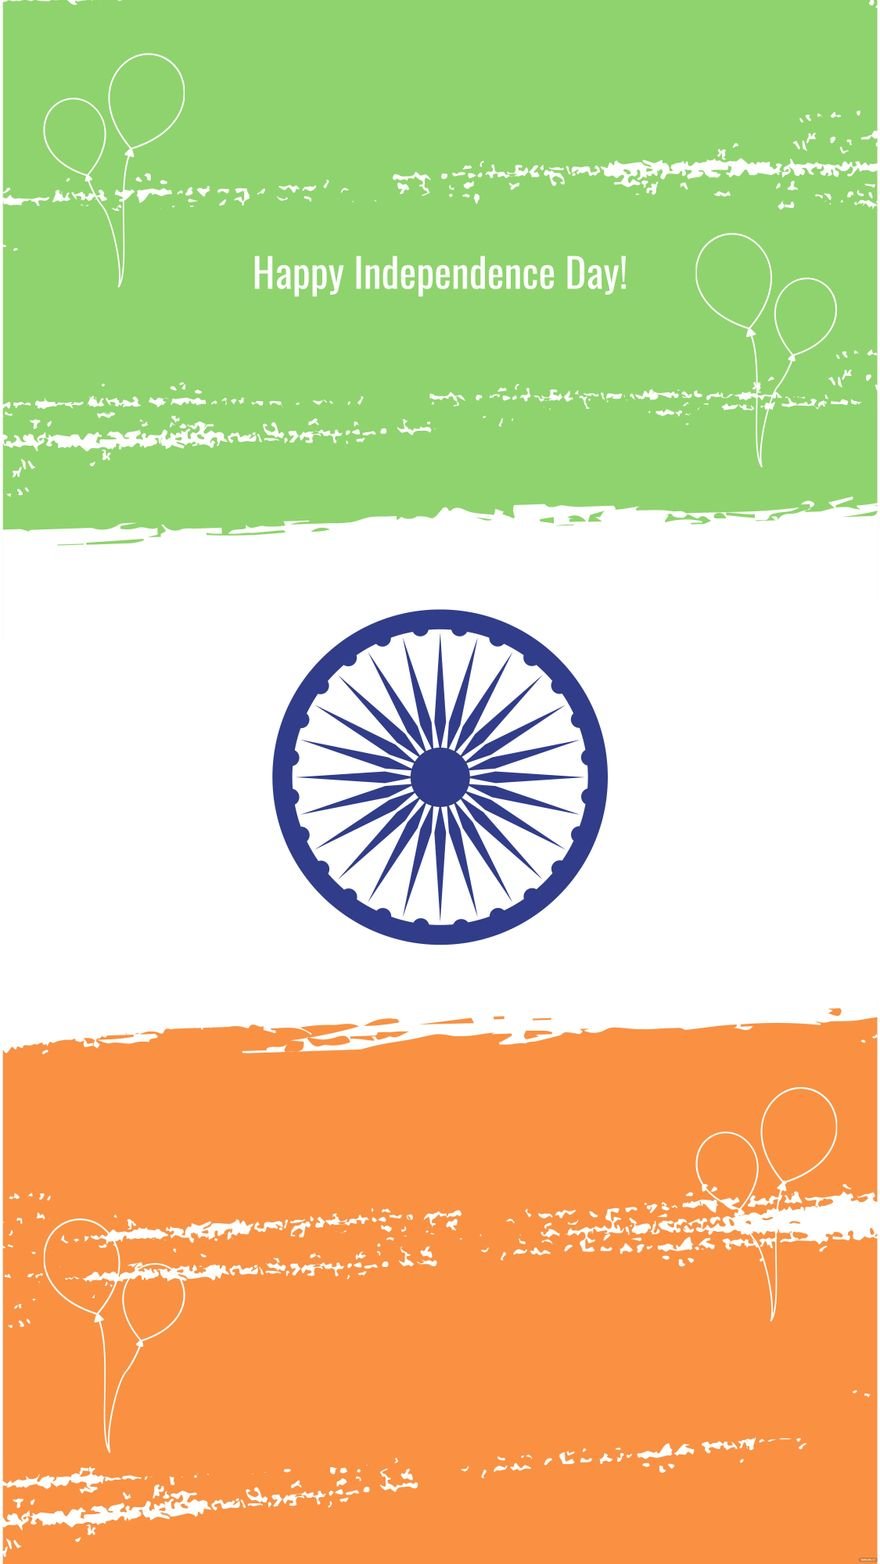 India Independence Day Iphone Wallpaper in Illustrator, EPS, SVG, JPG, PNG